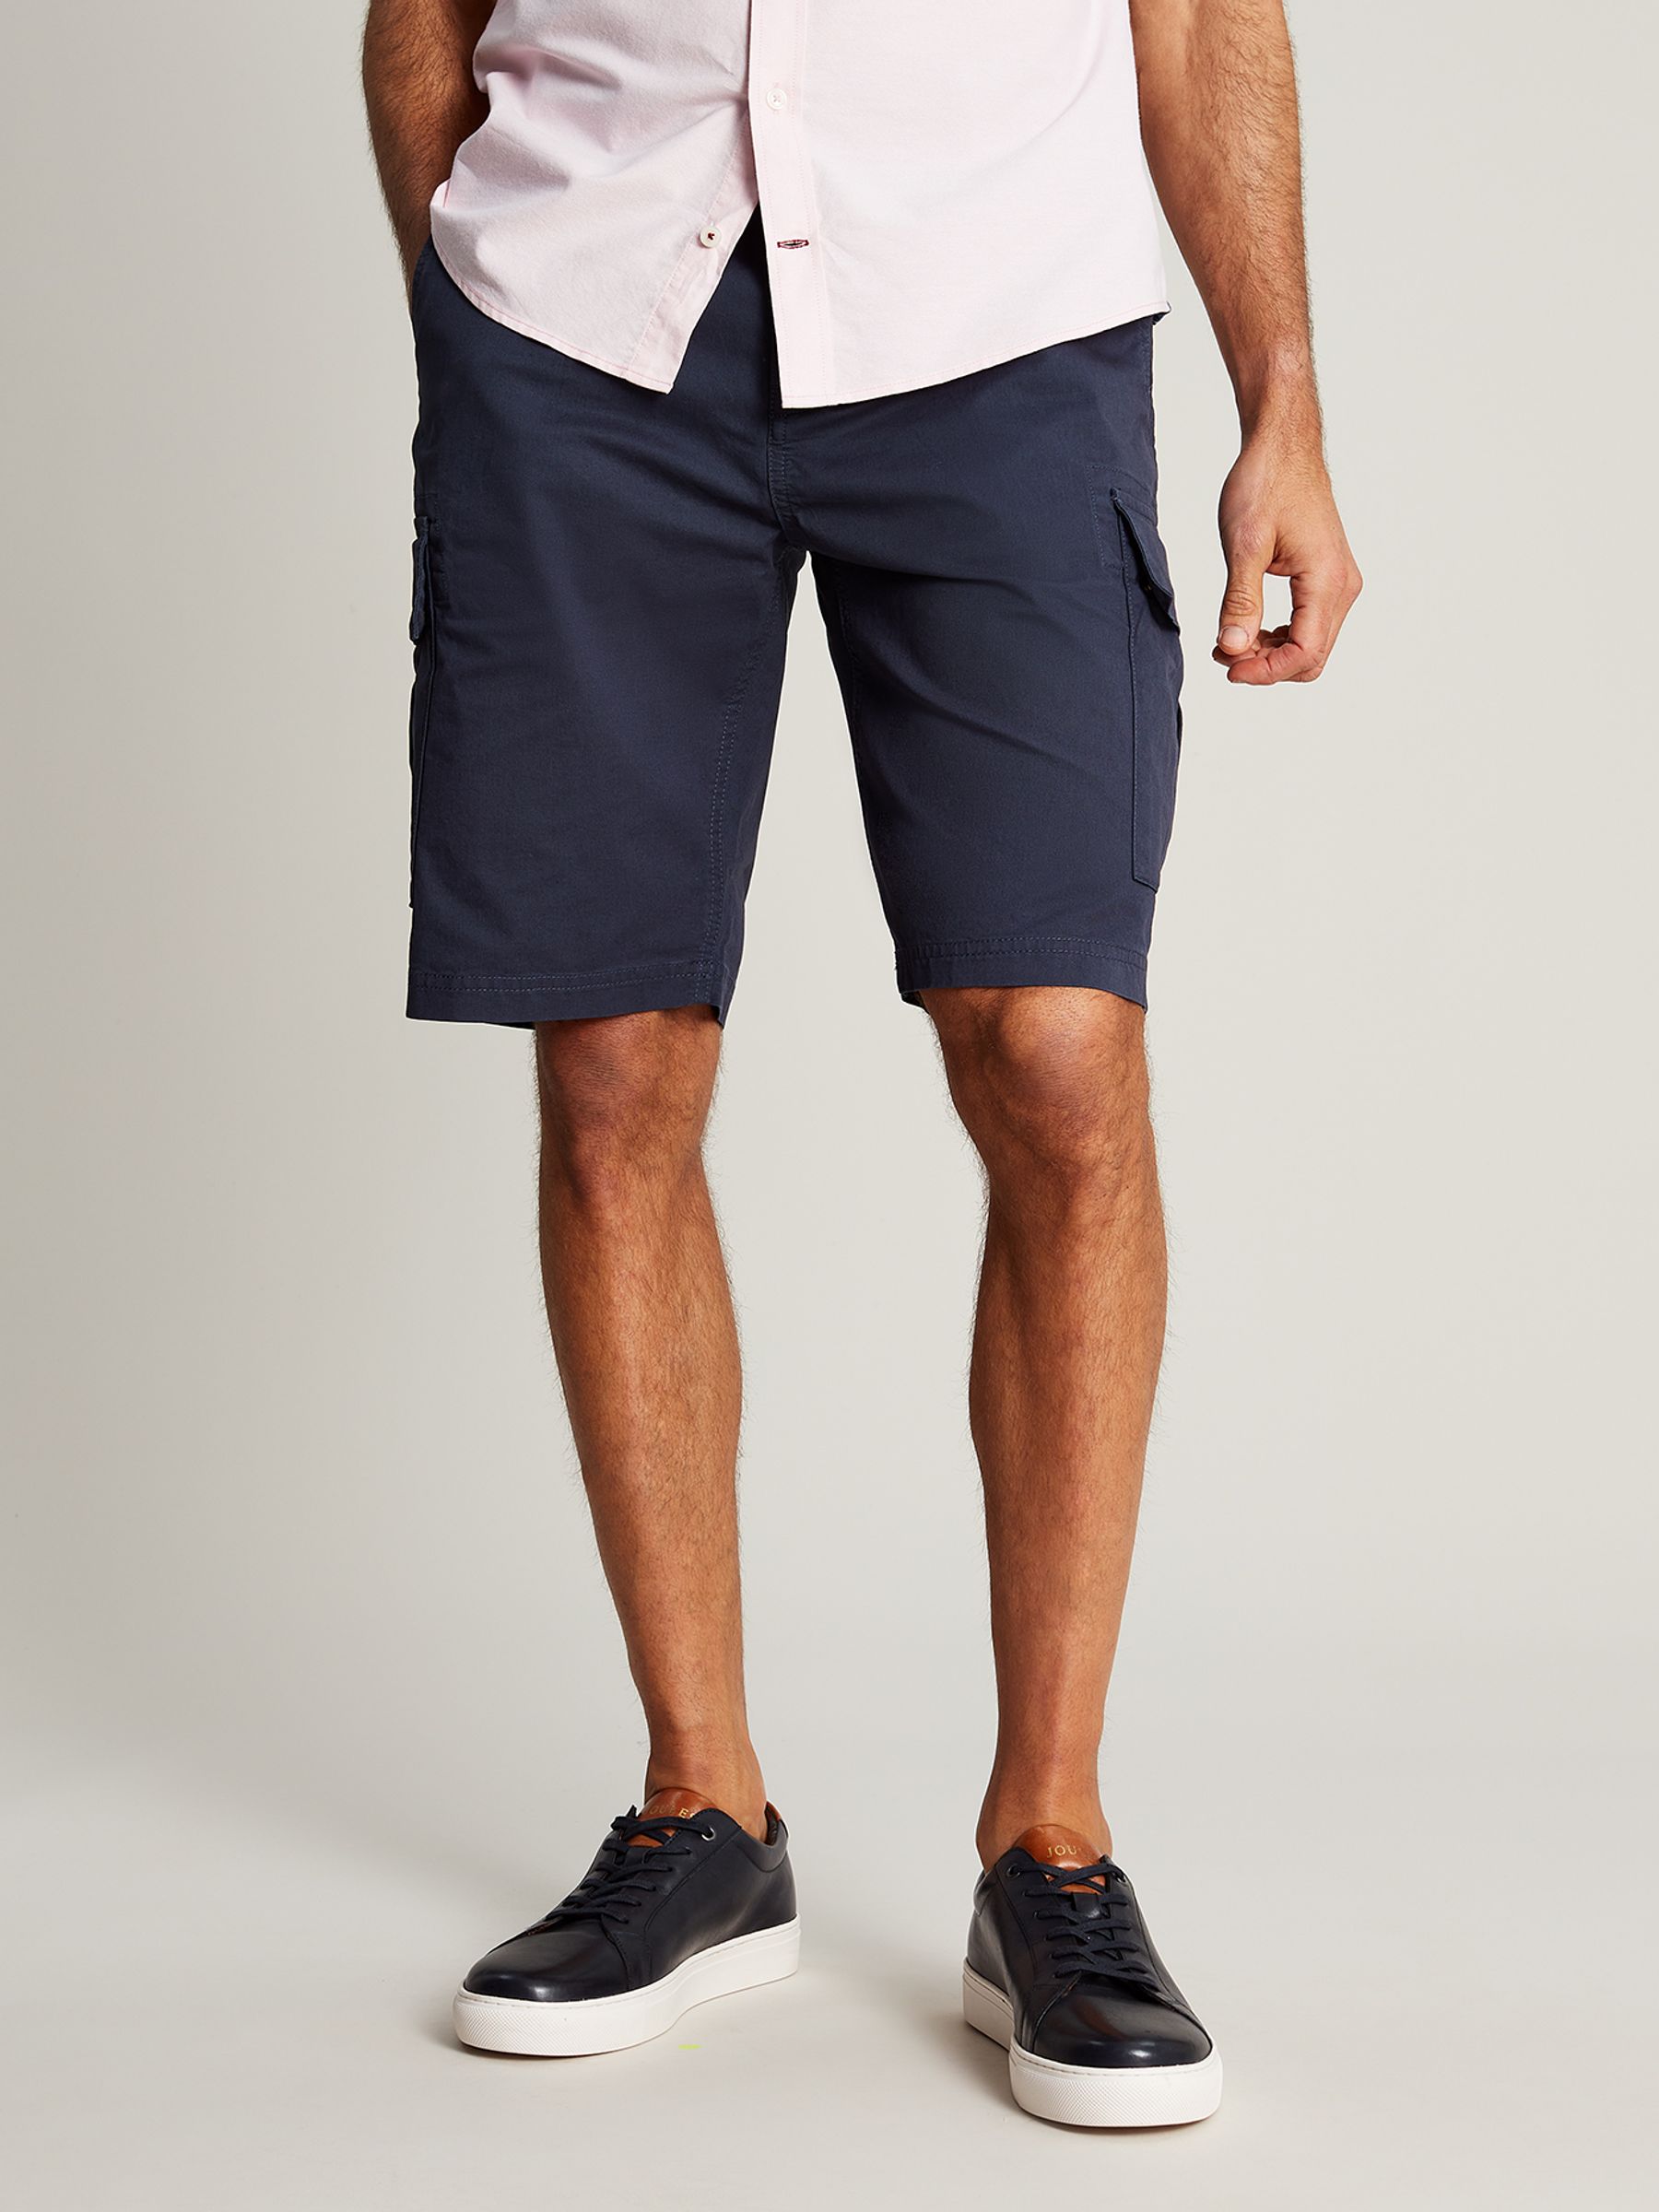 Buy Joules The Cargo Shorts from the Joules online shop